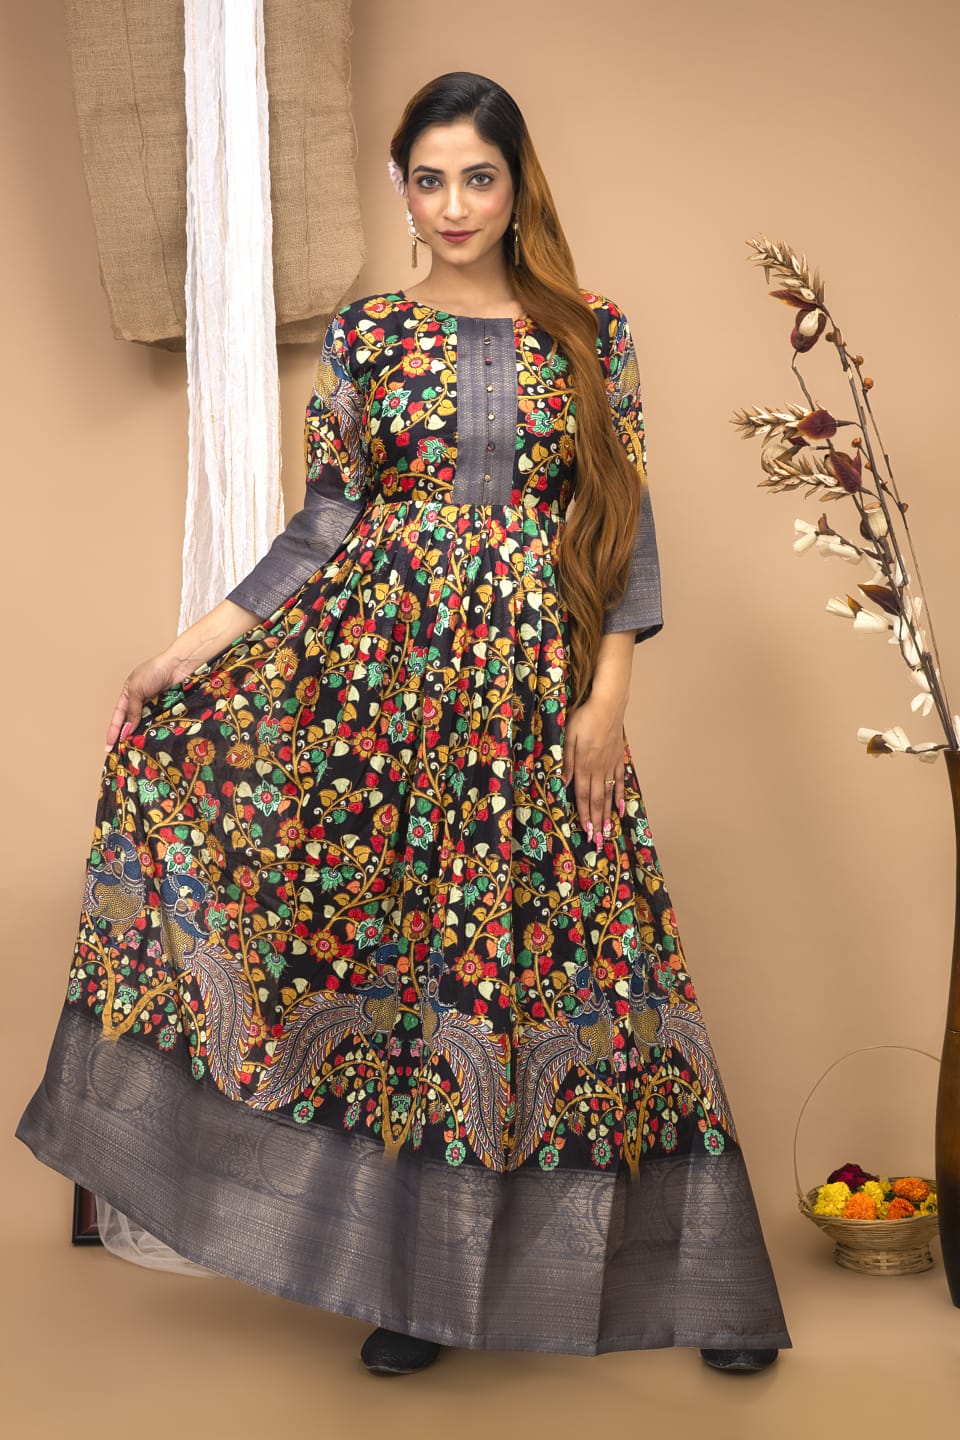 20 Beautiful Kalamkari Anarkali And Gown Designs To Try Out!!